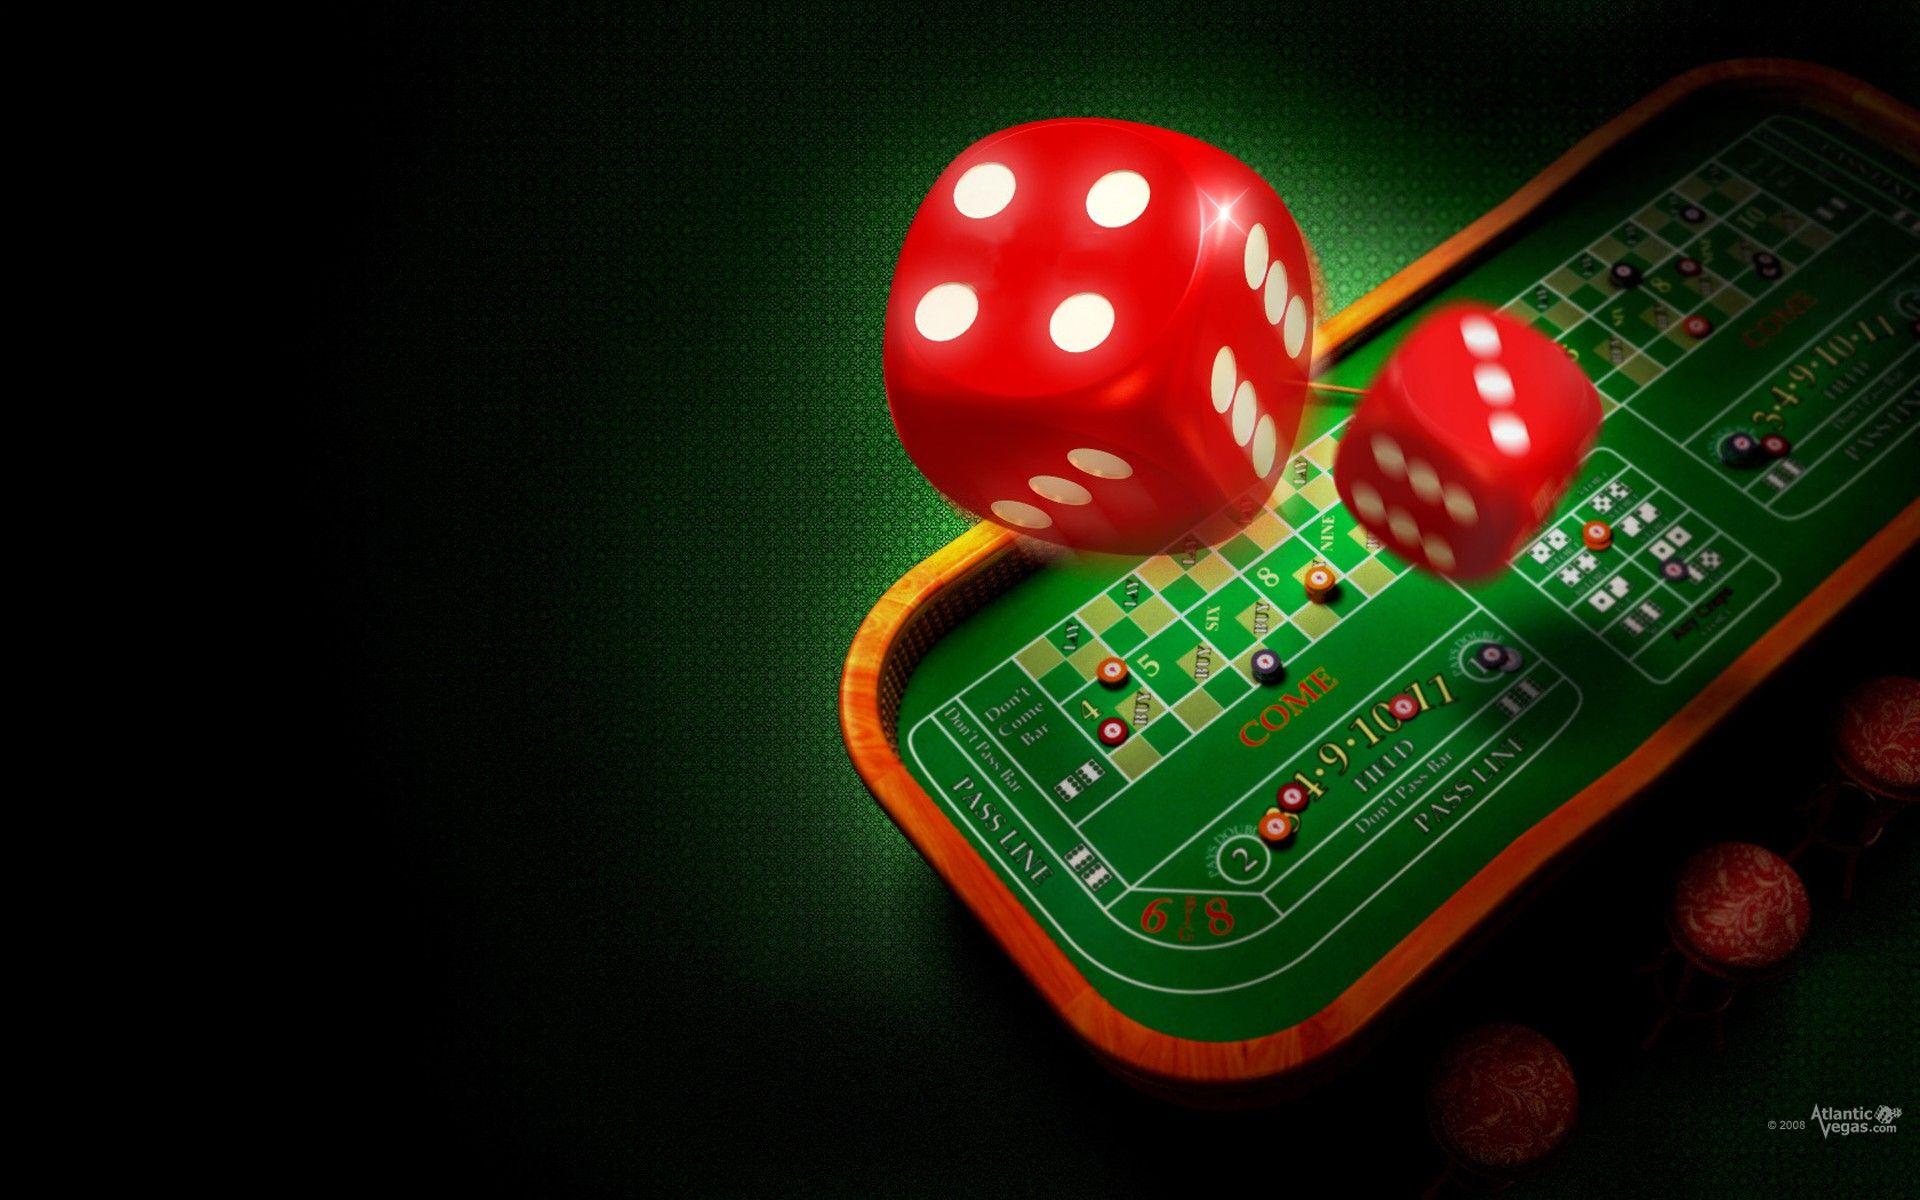 How Perform Hold 'Em Poker In The Live Casino